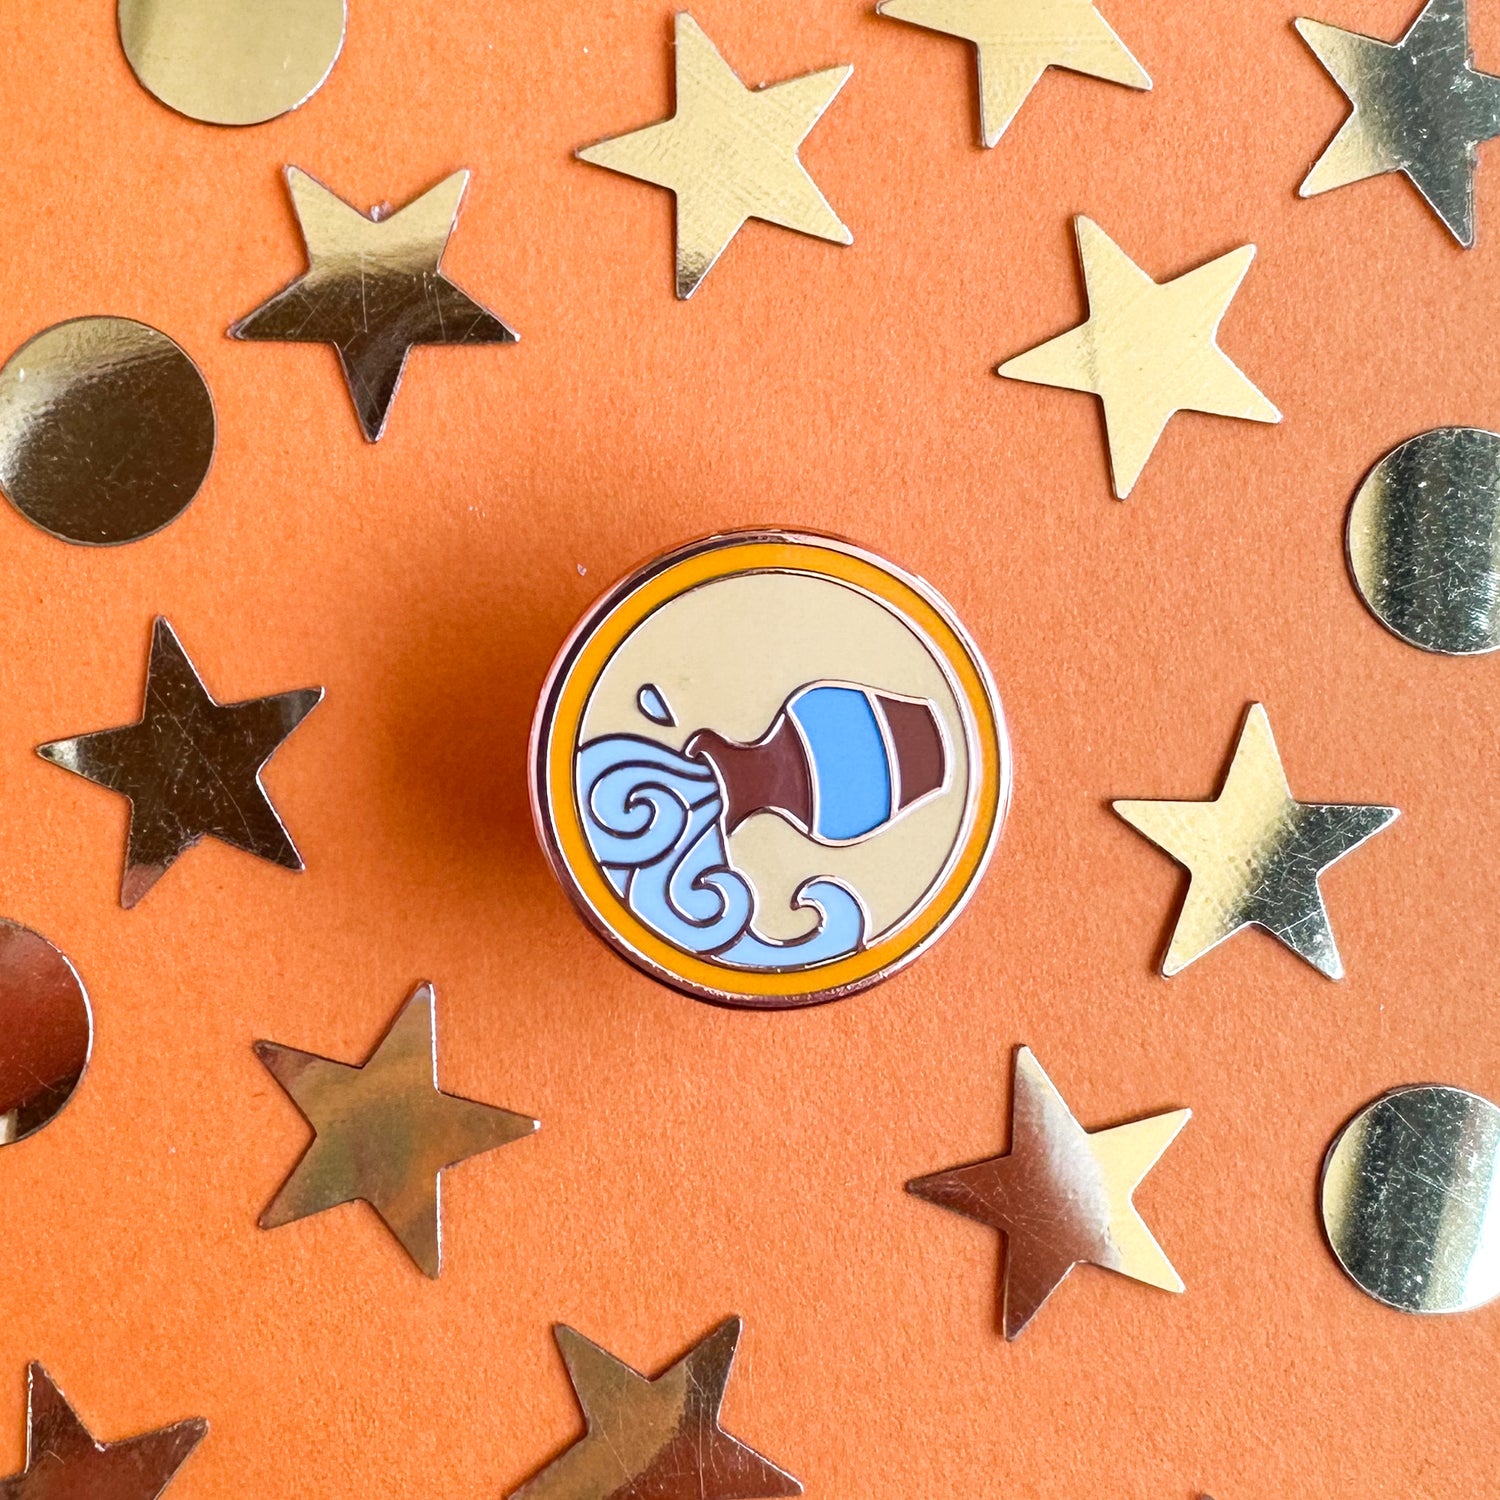 A circular pin containing a cute version of the Aquarius symbol, a water vessel pouring water, on an orange background with glitter stars and circles surrounding it. 